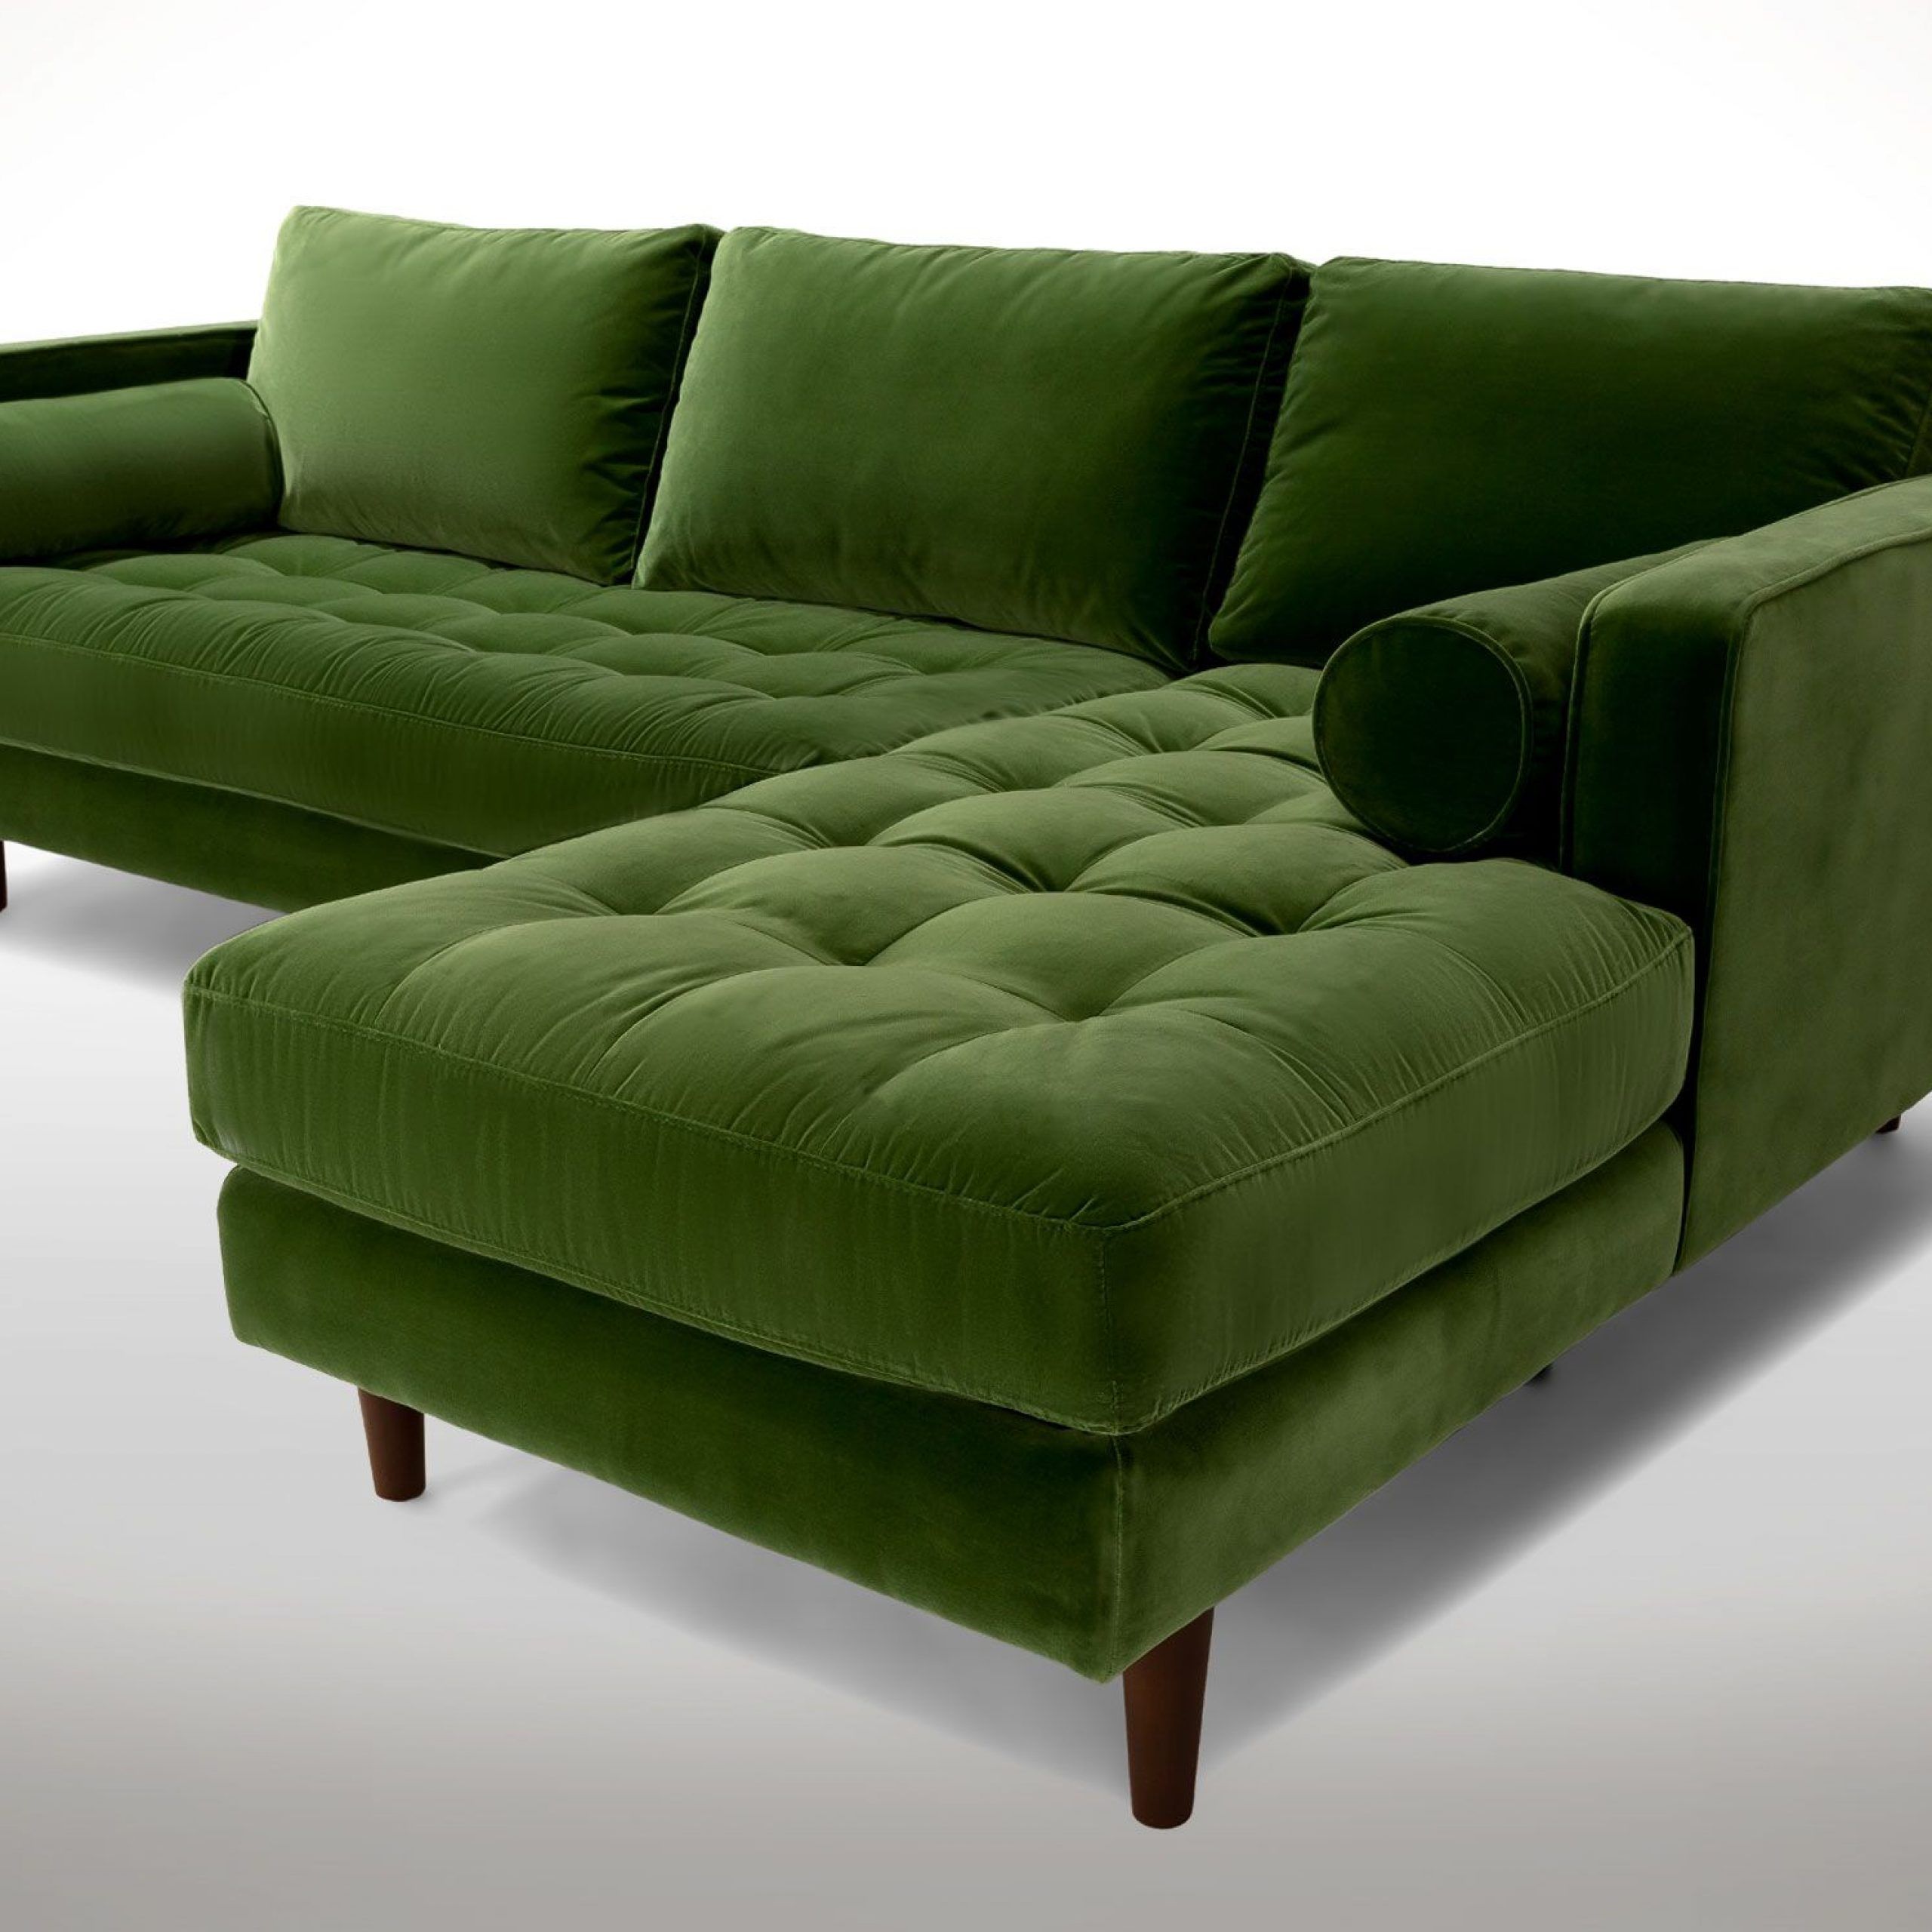 Sven Grass Green Right Sectional Sofa | Sectional Sofa Within Florence Mid Century Modern Velvet Right Sectional Sofas (View 14 of 15)